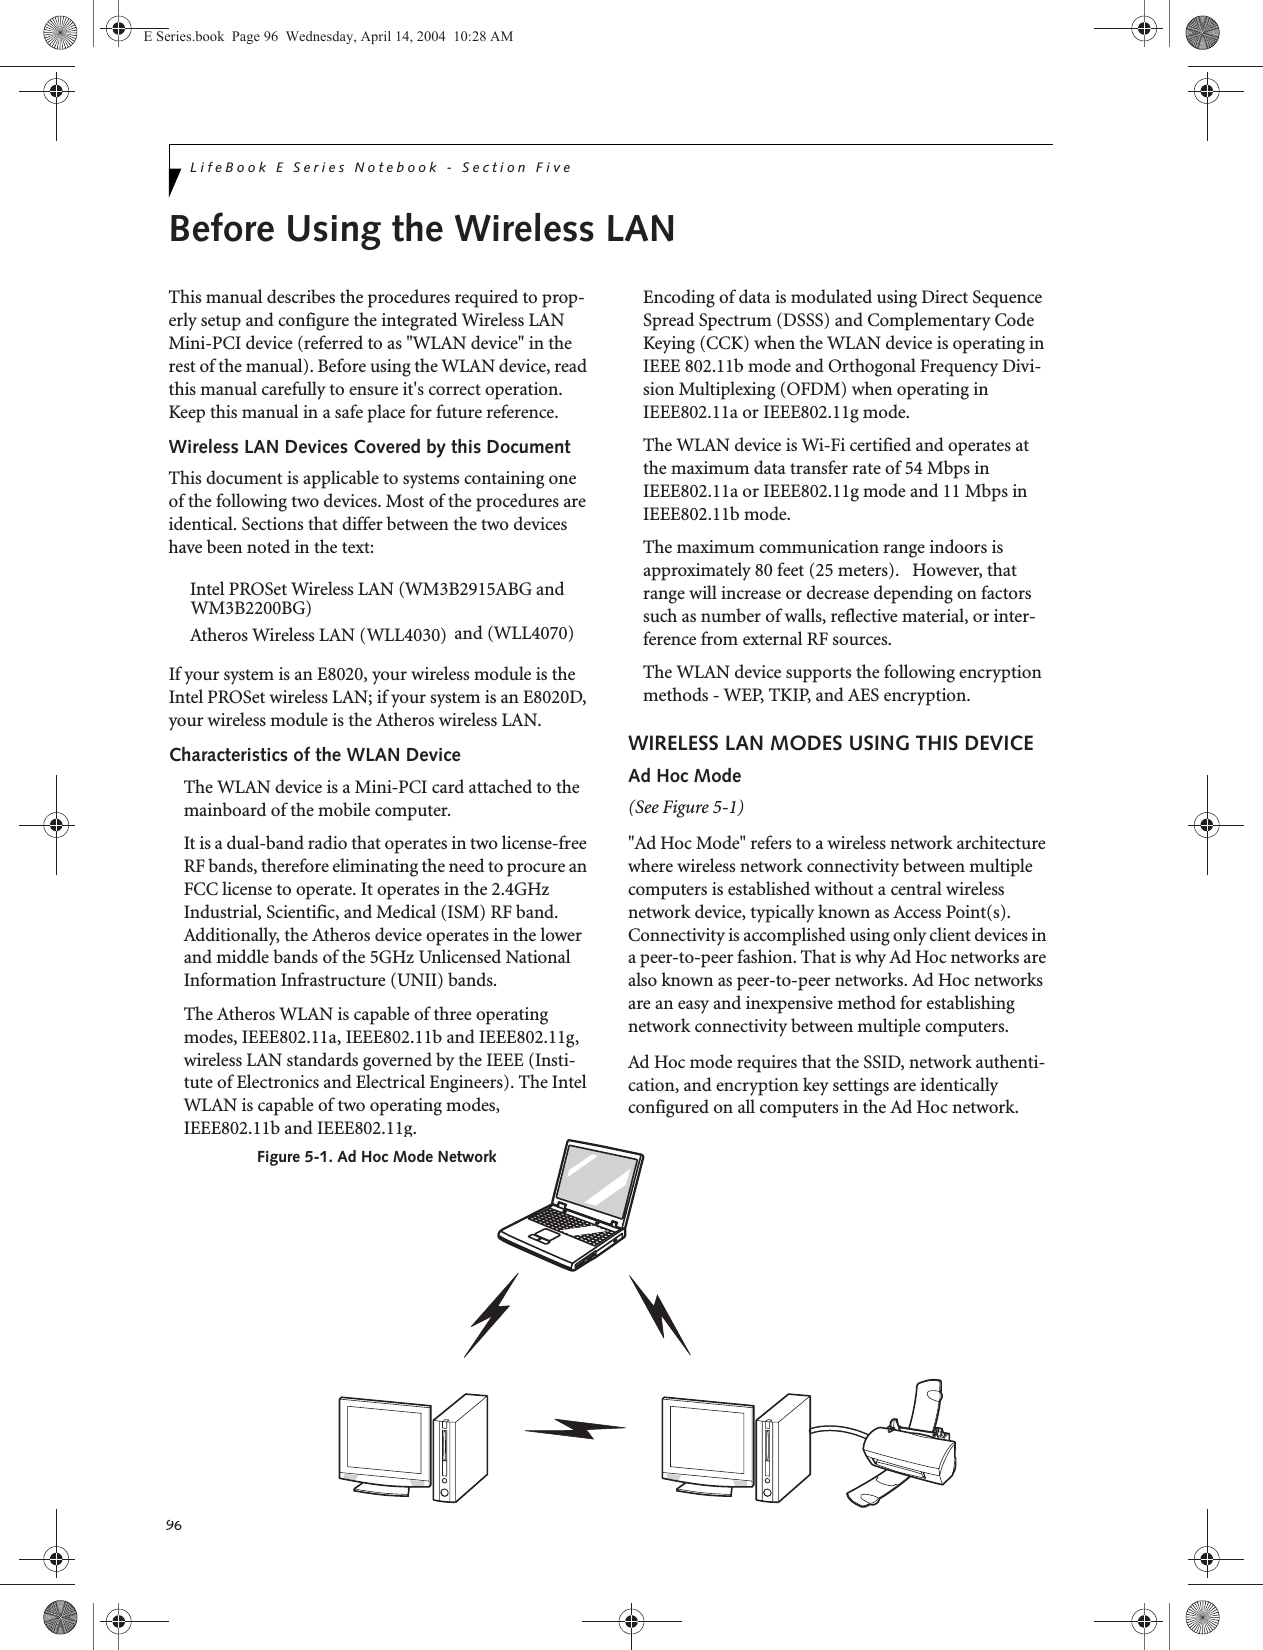 96LifeBook E Series Notebook - Section FiveBefore Using the Wireless LANThis manual describes the procedures required to prop-erly setup and configure the integrated Wireless LAN Mini-PCI device (referred to as &quot;WLAN device&quot; in the rest of the manual). Before using the WLAN device, read this manual carefully to ensure it&apos;s correct operation. Keep this manual in a safe place for future reference.Wireless LAN Devices Covered by this DocumentThis document is applicable to systems containing one of the following two devices. Most of the procedures are identical. Sections that differ between the two devices have been noted in the text:Intel PROSet Wireless LAN (WM3B2915ABG andAtheros Wireless LAN (WLL4030)If your system is an E8020, your wireless module is the Intel PROSet wireless LAN; if your system is an E8020D, your wireless module is the Atheros wireless LAN.Characteristics of the WLAN DeviceThe WLAN device is a Mini-PCI card attached to the mainboard of the mobile computer. It is a dual-band radio that operates in two license-free RF bands, therefore eliminating the need to procure an FCC license to operate. It operates in the 2.4GHz Industrial, Scientific, and Medical (ISM) RF band. Additionally, the Atheros device operates in the lower and middle bands of the 5GHz Unlicensed National Information Infrastructure (UNII) bands. The Atheros WLAN is capable of three operating modes, IEEE802.11a, IEEE802.11b and IEEE802.11g, wireless LAN standards governed by the IEEE (Insti-tute of Electronics and Electrical Engineers). The Intel WLAN is capable of two operating modes, IEEE802.11b and IEEE802.11g.Encoding of data is modulated using Direct Sequence Spread Spectrum (DSSS) and Complementary Code Keying (CCK) when the WLAN device is operating in IEEE 802.11b mode and Orthogonal Frequency Divi-sion Multiplexing (OFDM) when operating in IEEE802.11a or IEEE802.11g mode. The WLAN device is Wi-Fi certified and operates at the maximum data transfer rate of 54 Mbps in IEEE802.11a or IEEE802.11g mode and 11 Mbps in IEEE802.11b mode.The maximum communication range indoors is approximately 80 feet (25 meters).   However, that range will increase or decrease depending on factors such as number of walls, reflective material, or inter-ference from external RF sources.The WLAN device supports the following encryption methods - WEP, TKIP, and AES encryption.WIRELESS LAN MODES USING THIS DEVICEAd Hoc Mode (See Figure 5-1)&quot;Ad Hoc Mode&quot; refers to a wireless network architecture where wireless network connectivity between multiple computers is established without a central wireless network device, typically known as Access Point(s). Connectivity is accomplished using only client devices in a peer-to-peer fashion. That is why Ad Hoc networks are also known as peer-to-peer networks. Ad Hoc networks are an easy and inexpensive method for establishing network connectivity between multiple computers.Ad Hoc mode requires that the SSID, network authenti-cation, and encryption key settings are identically configured on all computers in the Ad Hoc network. Figure 5-1. Ad Hoc Mode NetworkE Series.book  Page 96  Wednesday, April 14, 2004  10:28 AMWM3B2200BG)and (WLL4070)